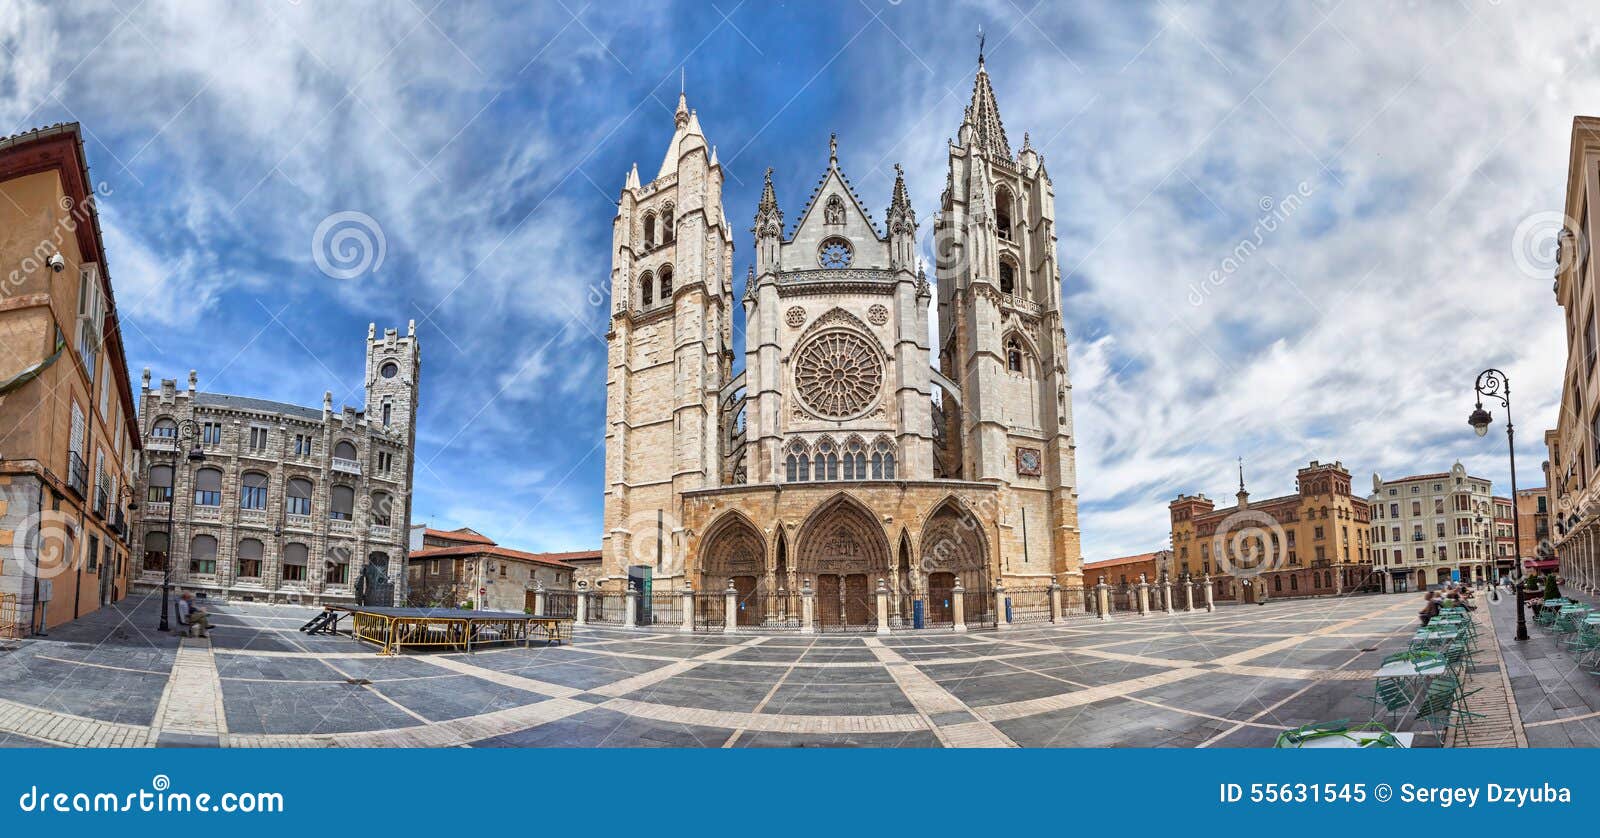 panorama of plaza de regla and leon cathedral, spain